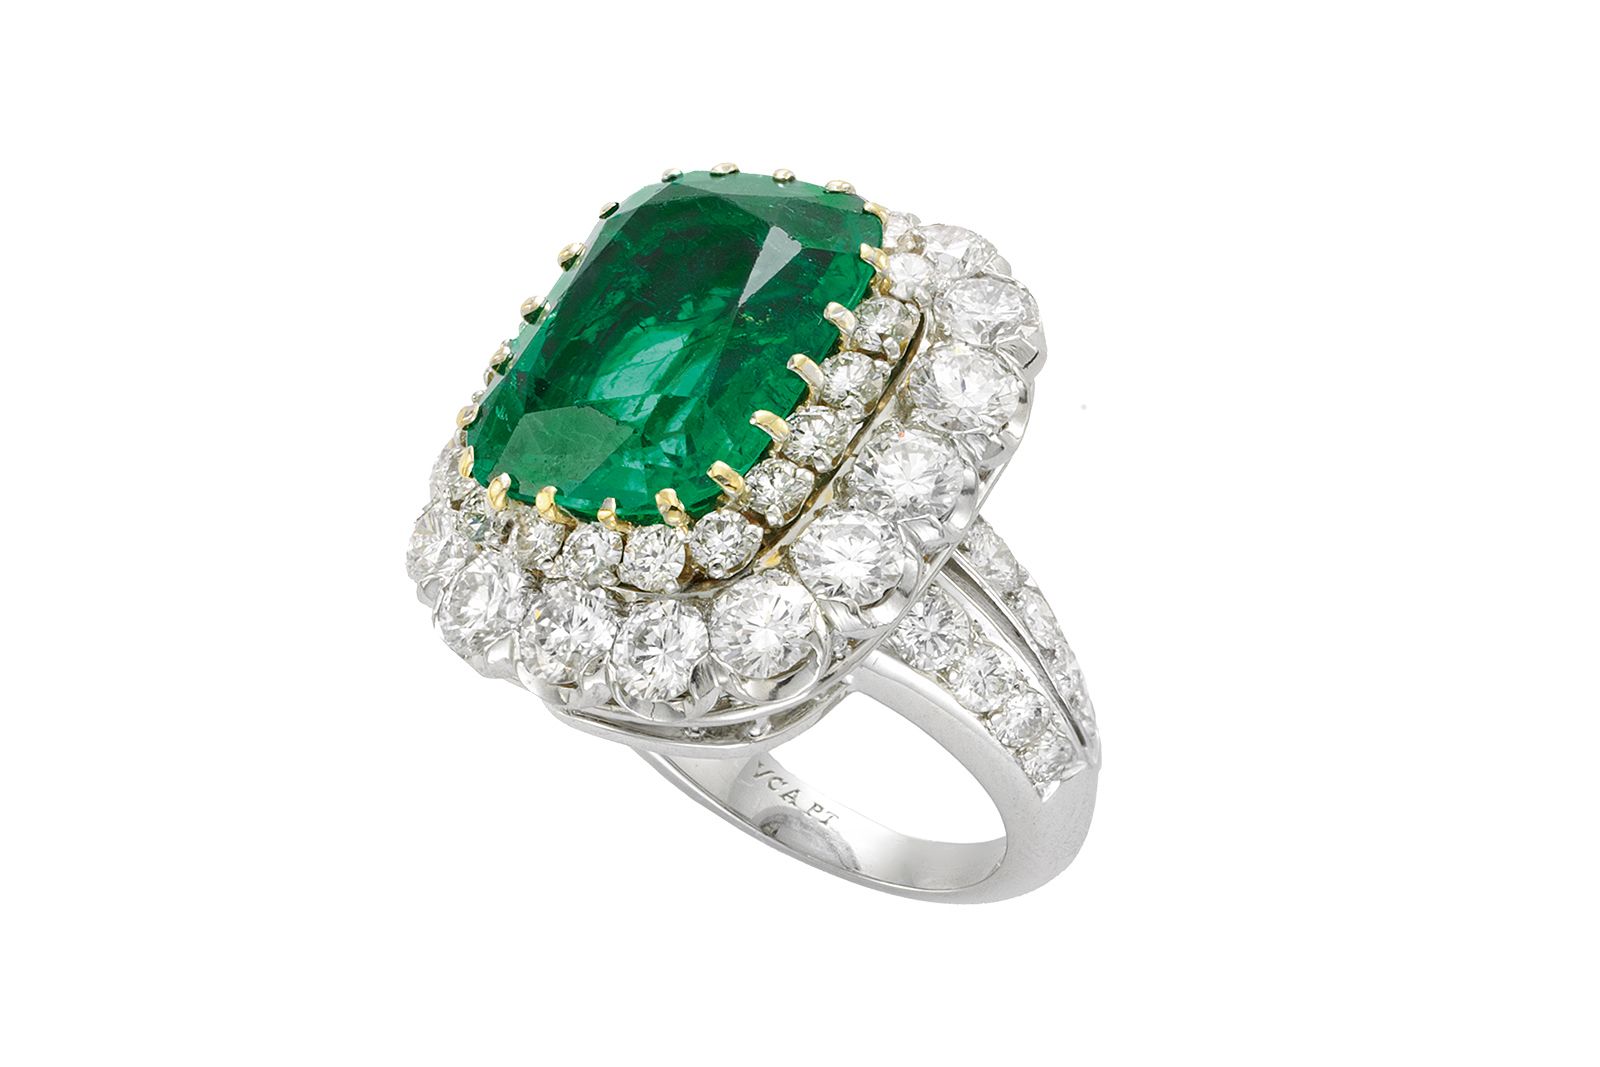 Van Cleef & Arpels ring with a 6.61 carat cushion-cut Colombian emerald in platinum, white gold and yellow gold, circa 1950 